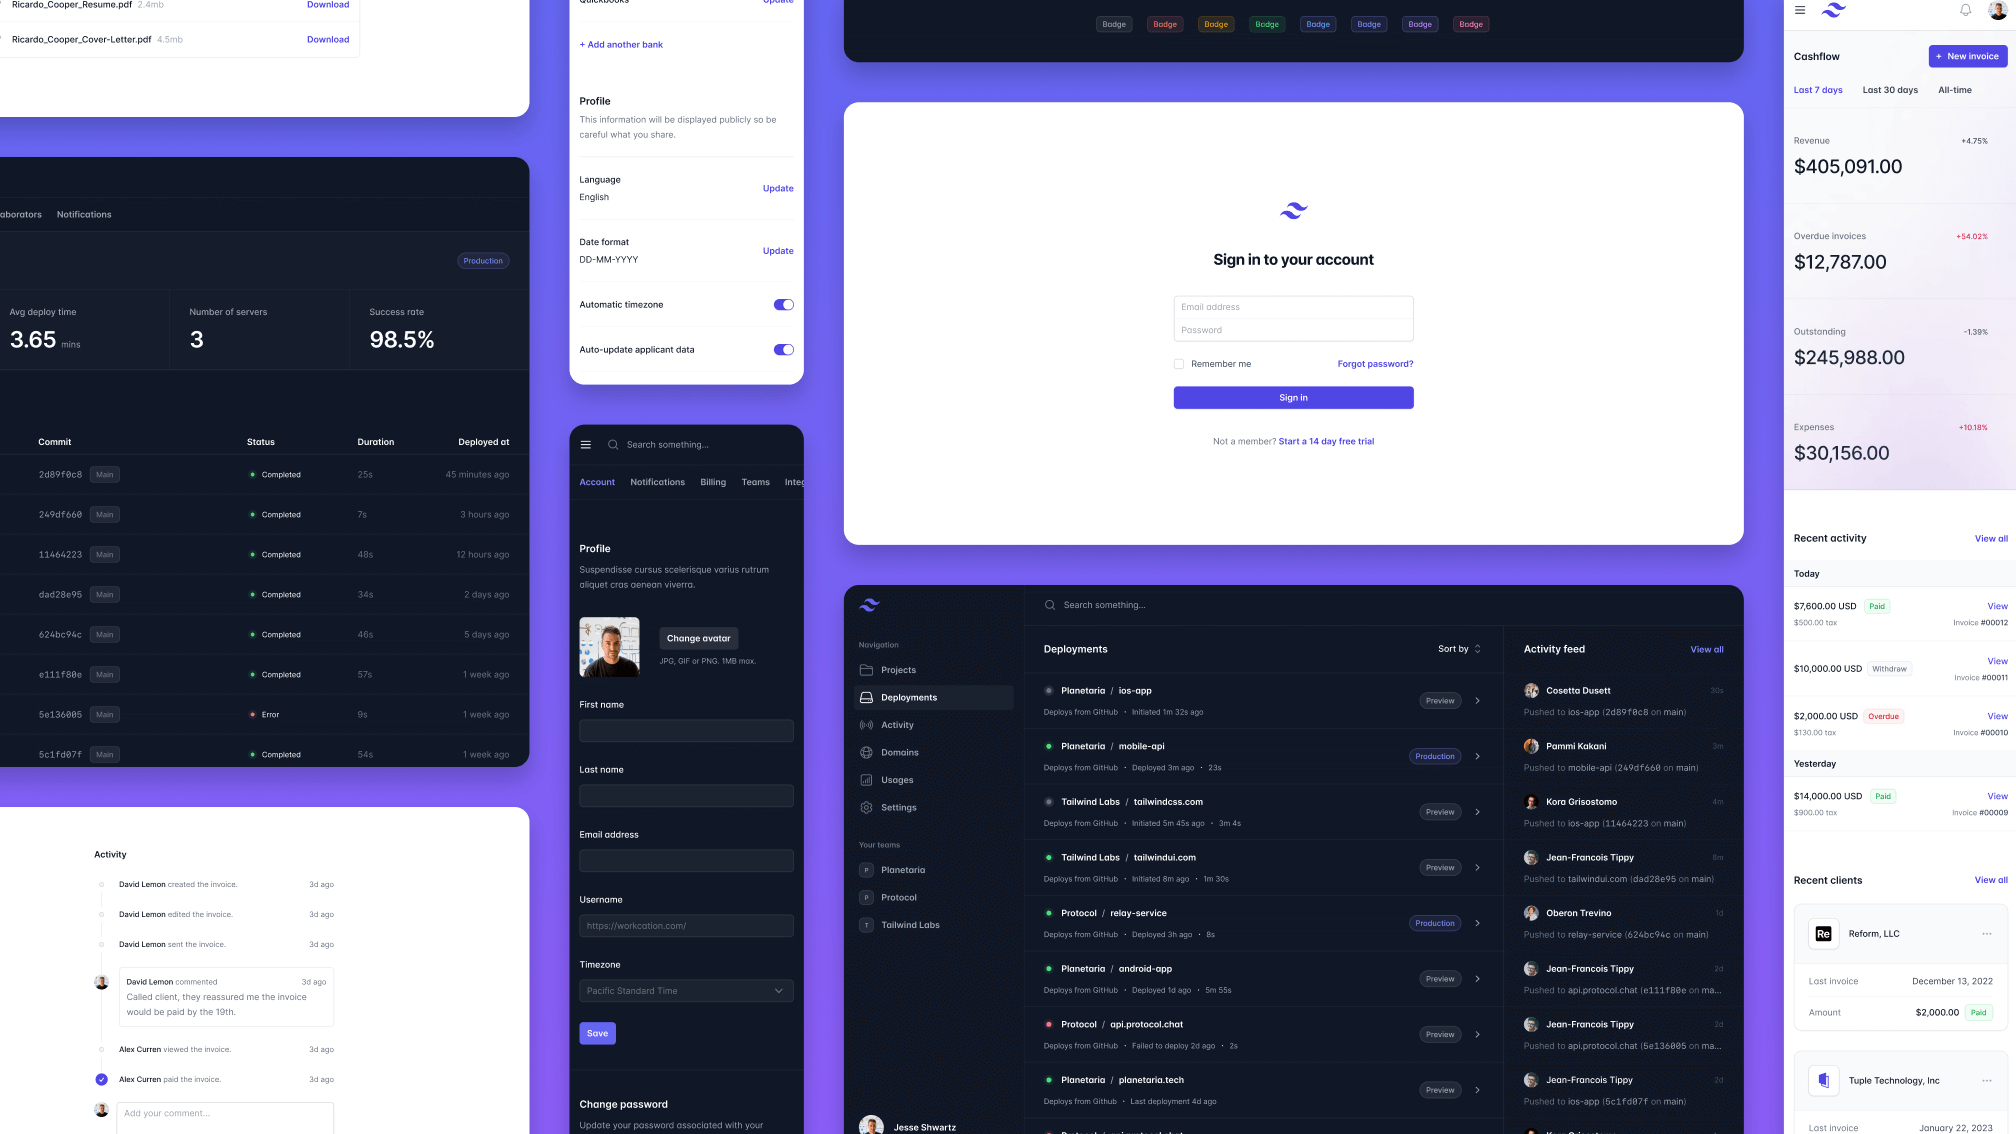 Collage of new application UI component designs